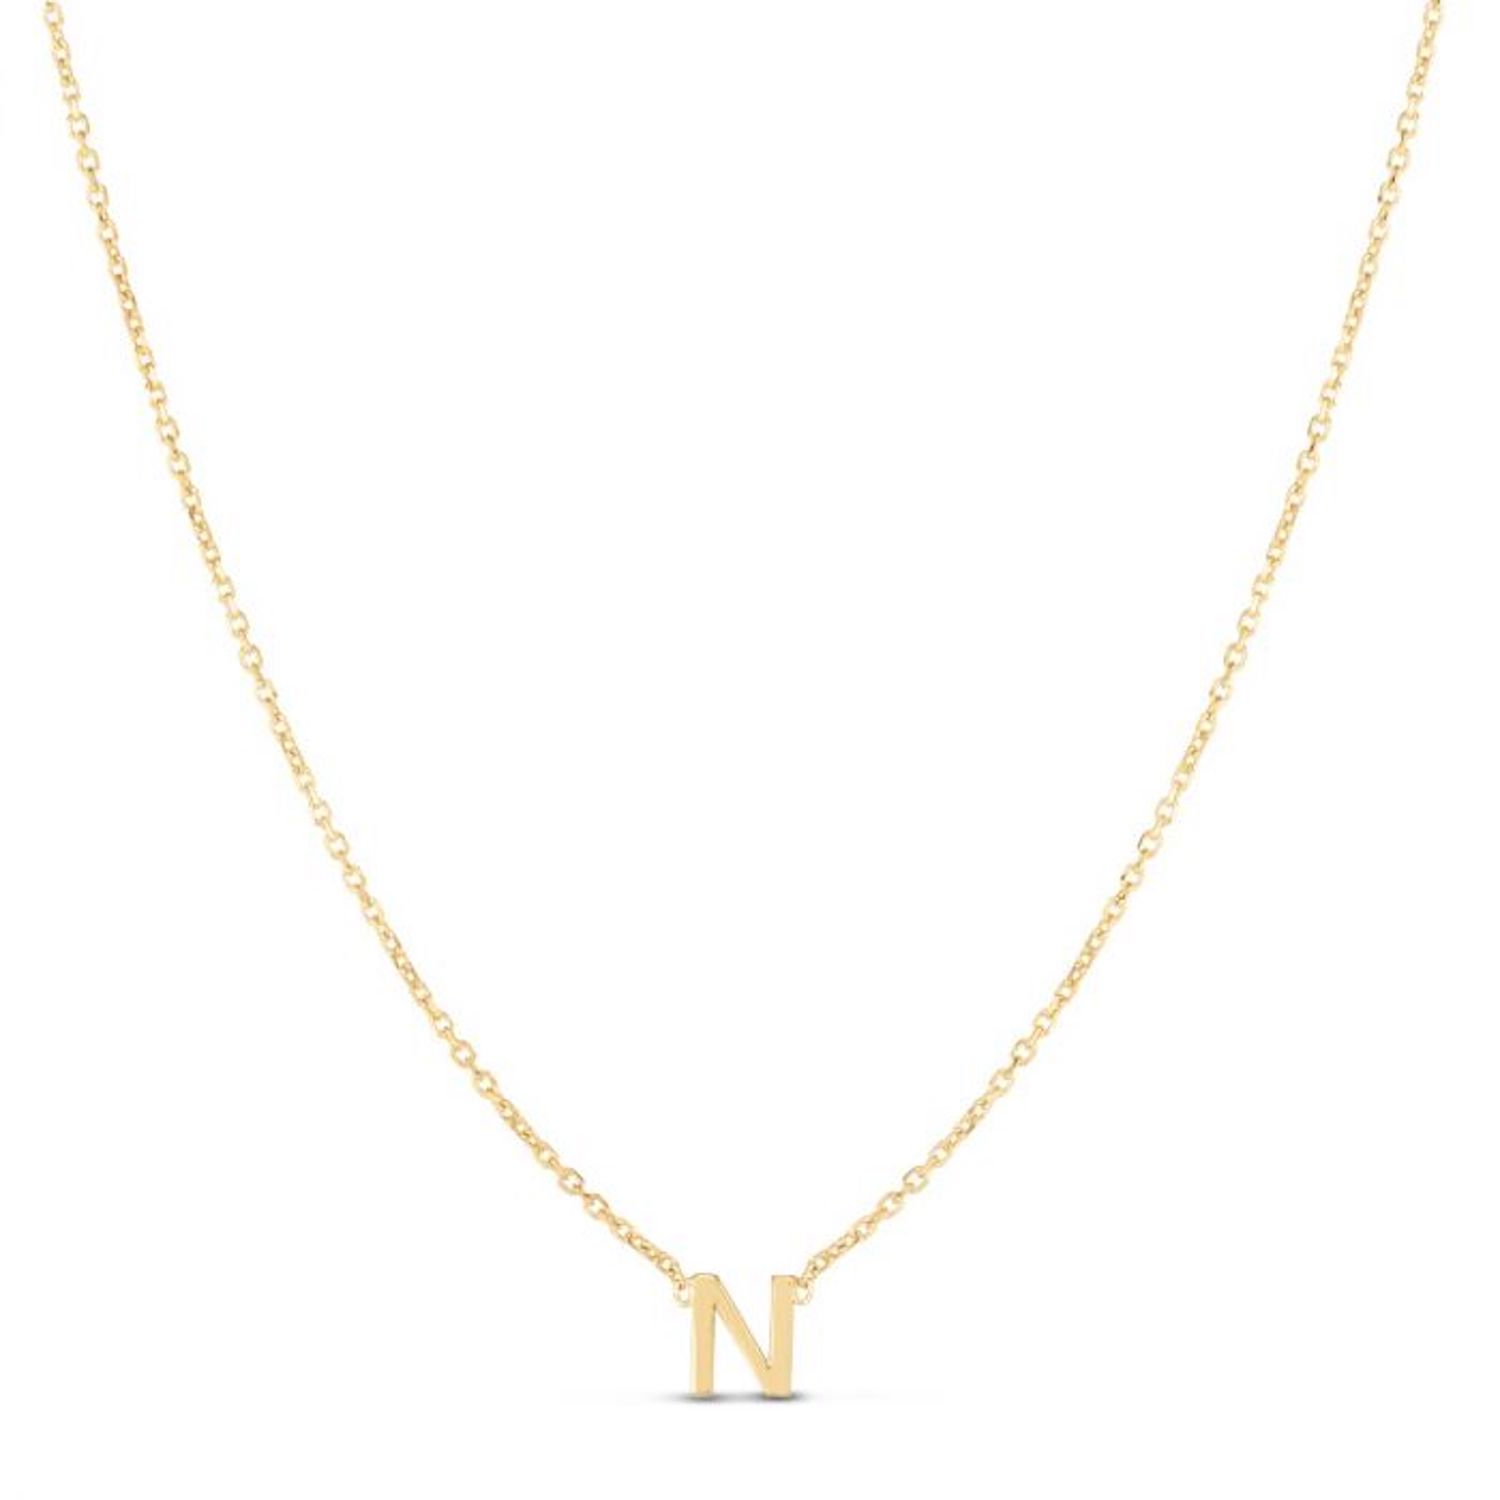 14K Yellow Gold Letter Initials Pendant Necklace 16"-18" - N